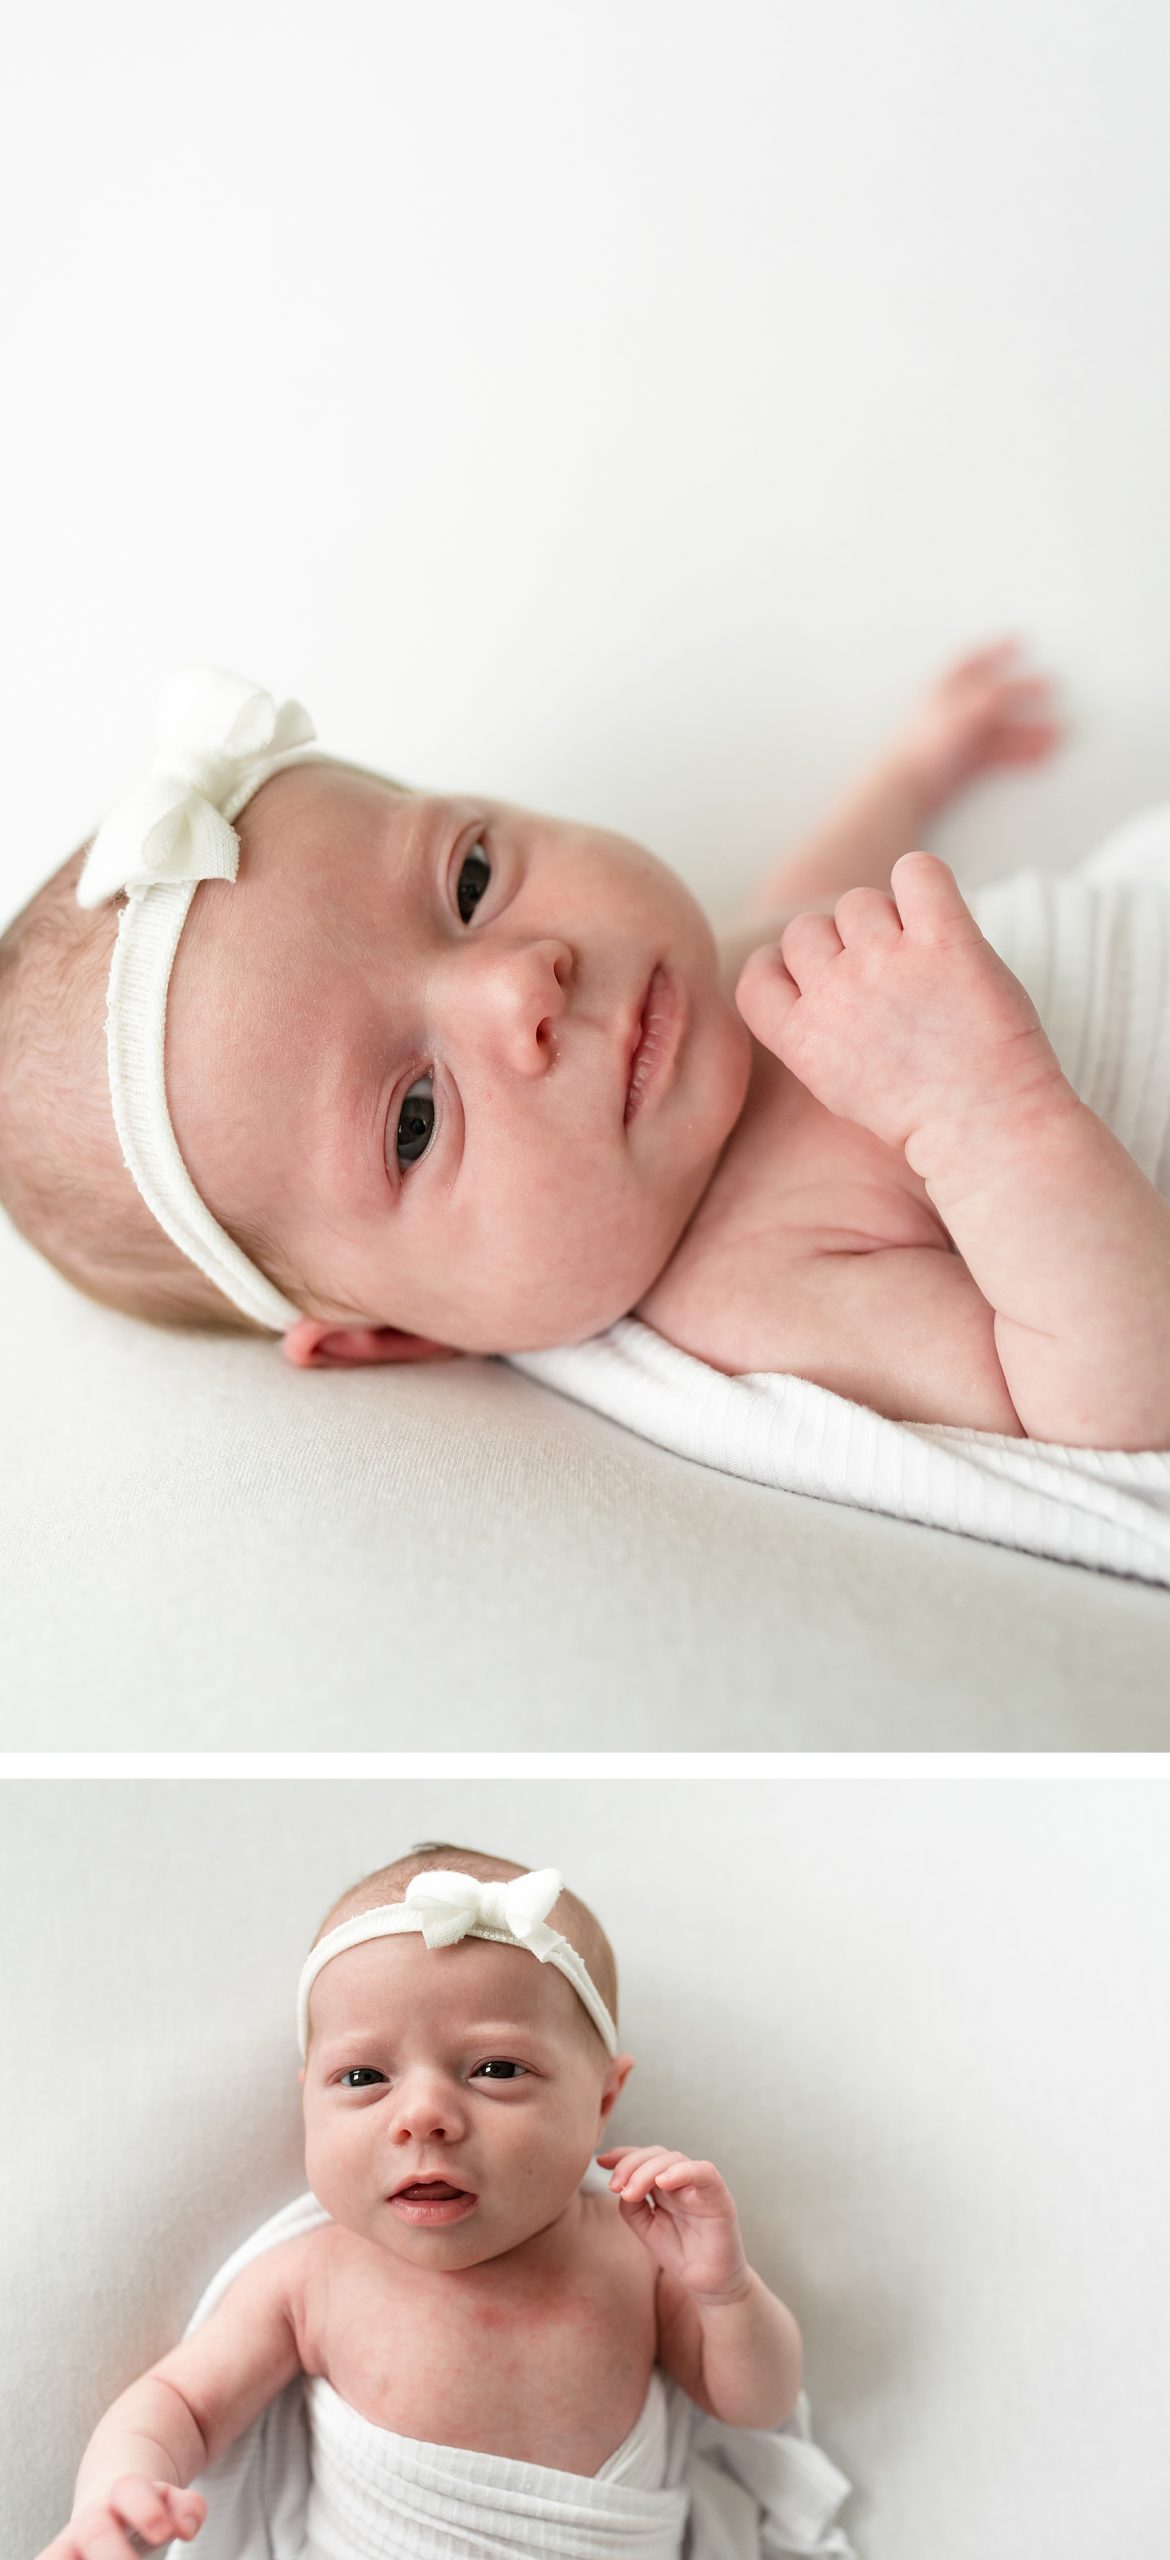 Newborn baby girl in white swaddle at in-home newborn session | Lindsey Dutton Photography | newborn photos, family photos at home, neutral family outfits | via lindseyduttonphotography.com